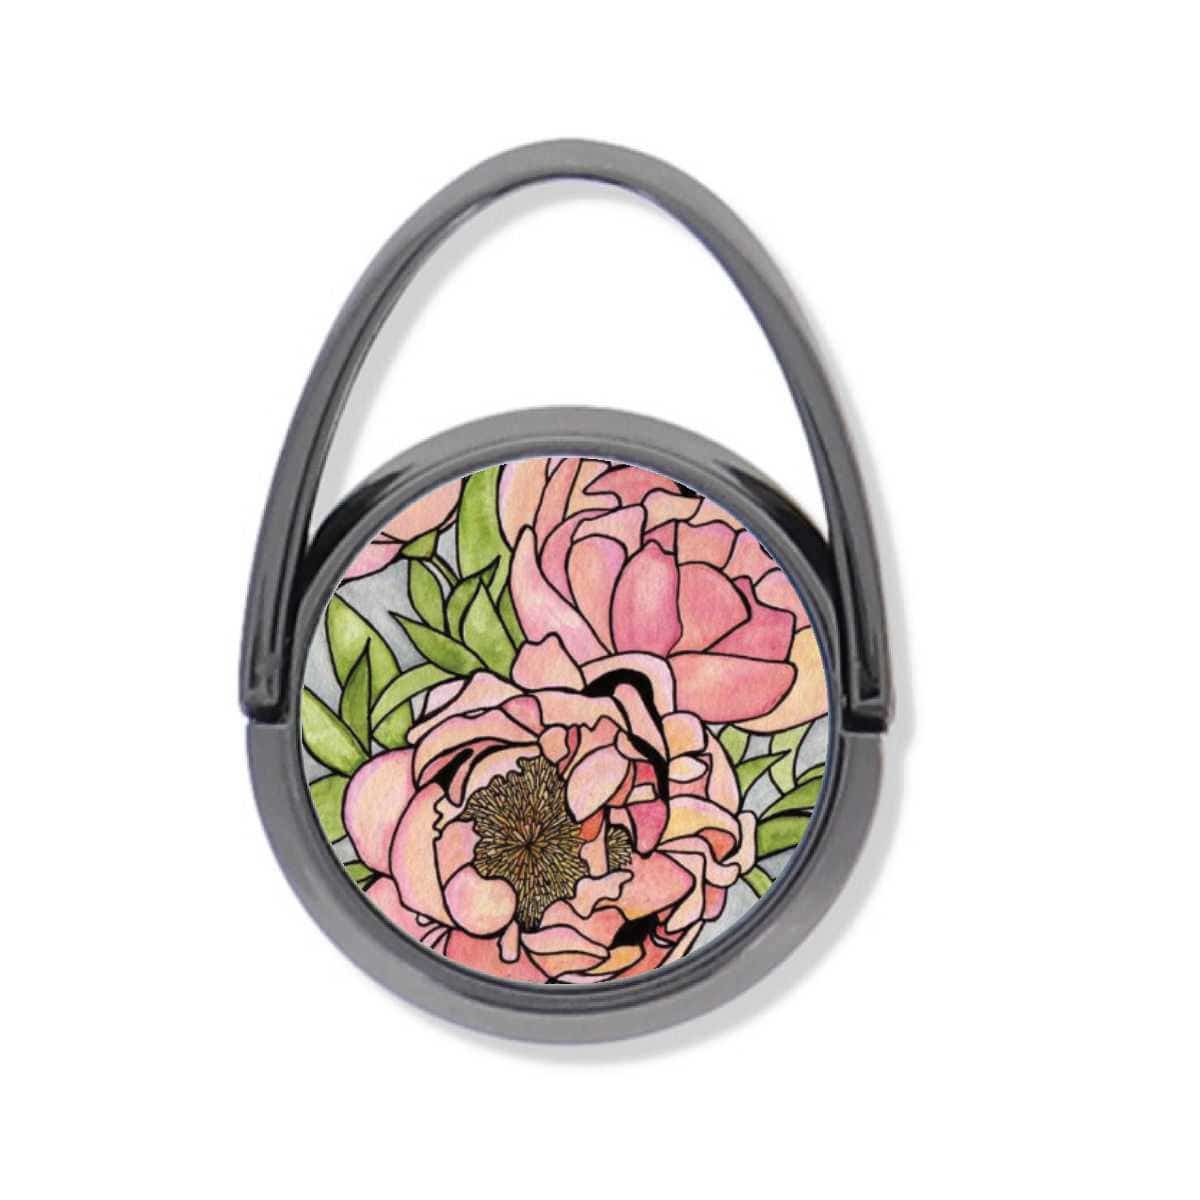 PinkPolish Design Mobile Phone Stands "Floral Carpet" Ring Style Phone Grip & Stand